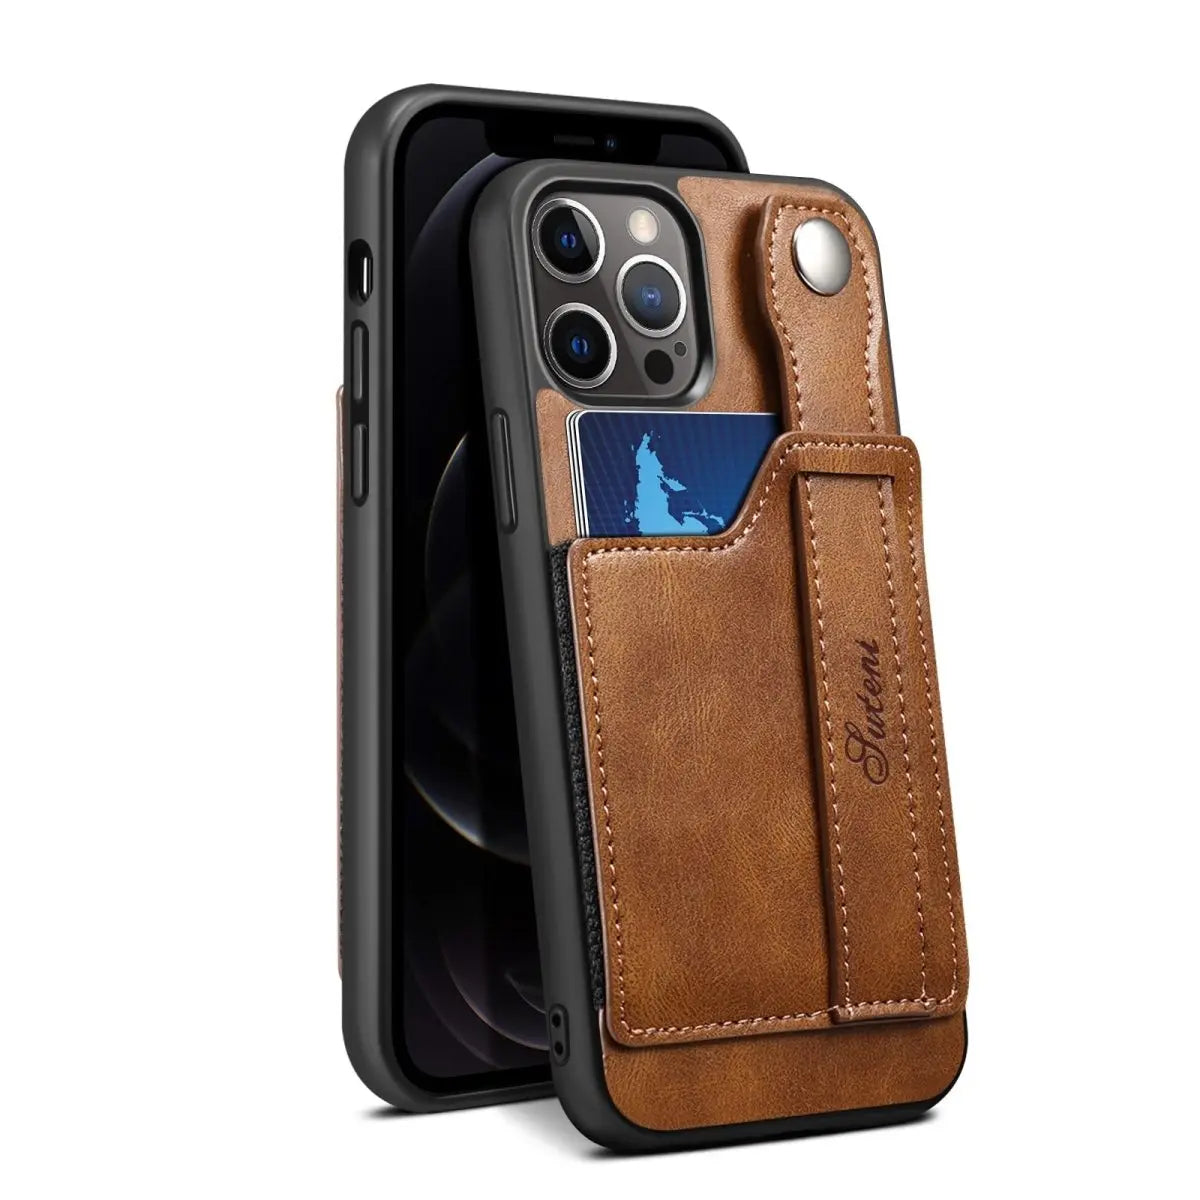 Obli Leather iPhone Wallet Case phone case iphone
Samsung cases
OnePlus cases
Huawei cases